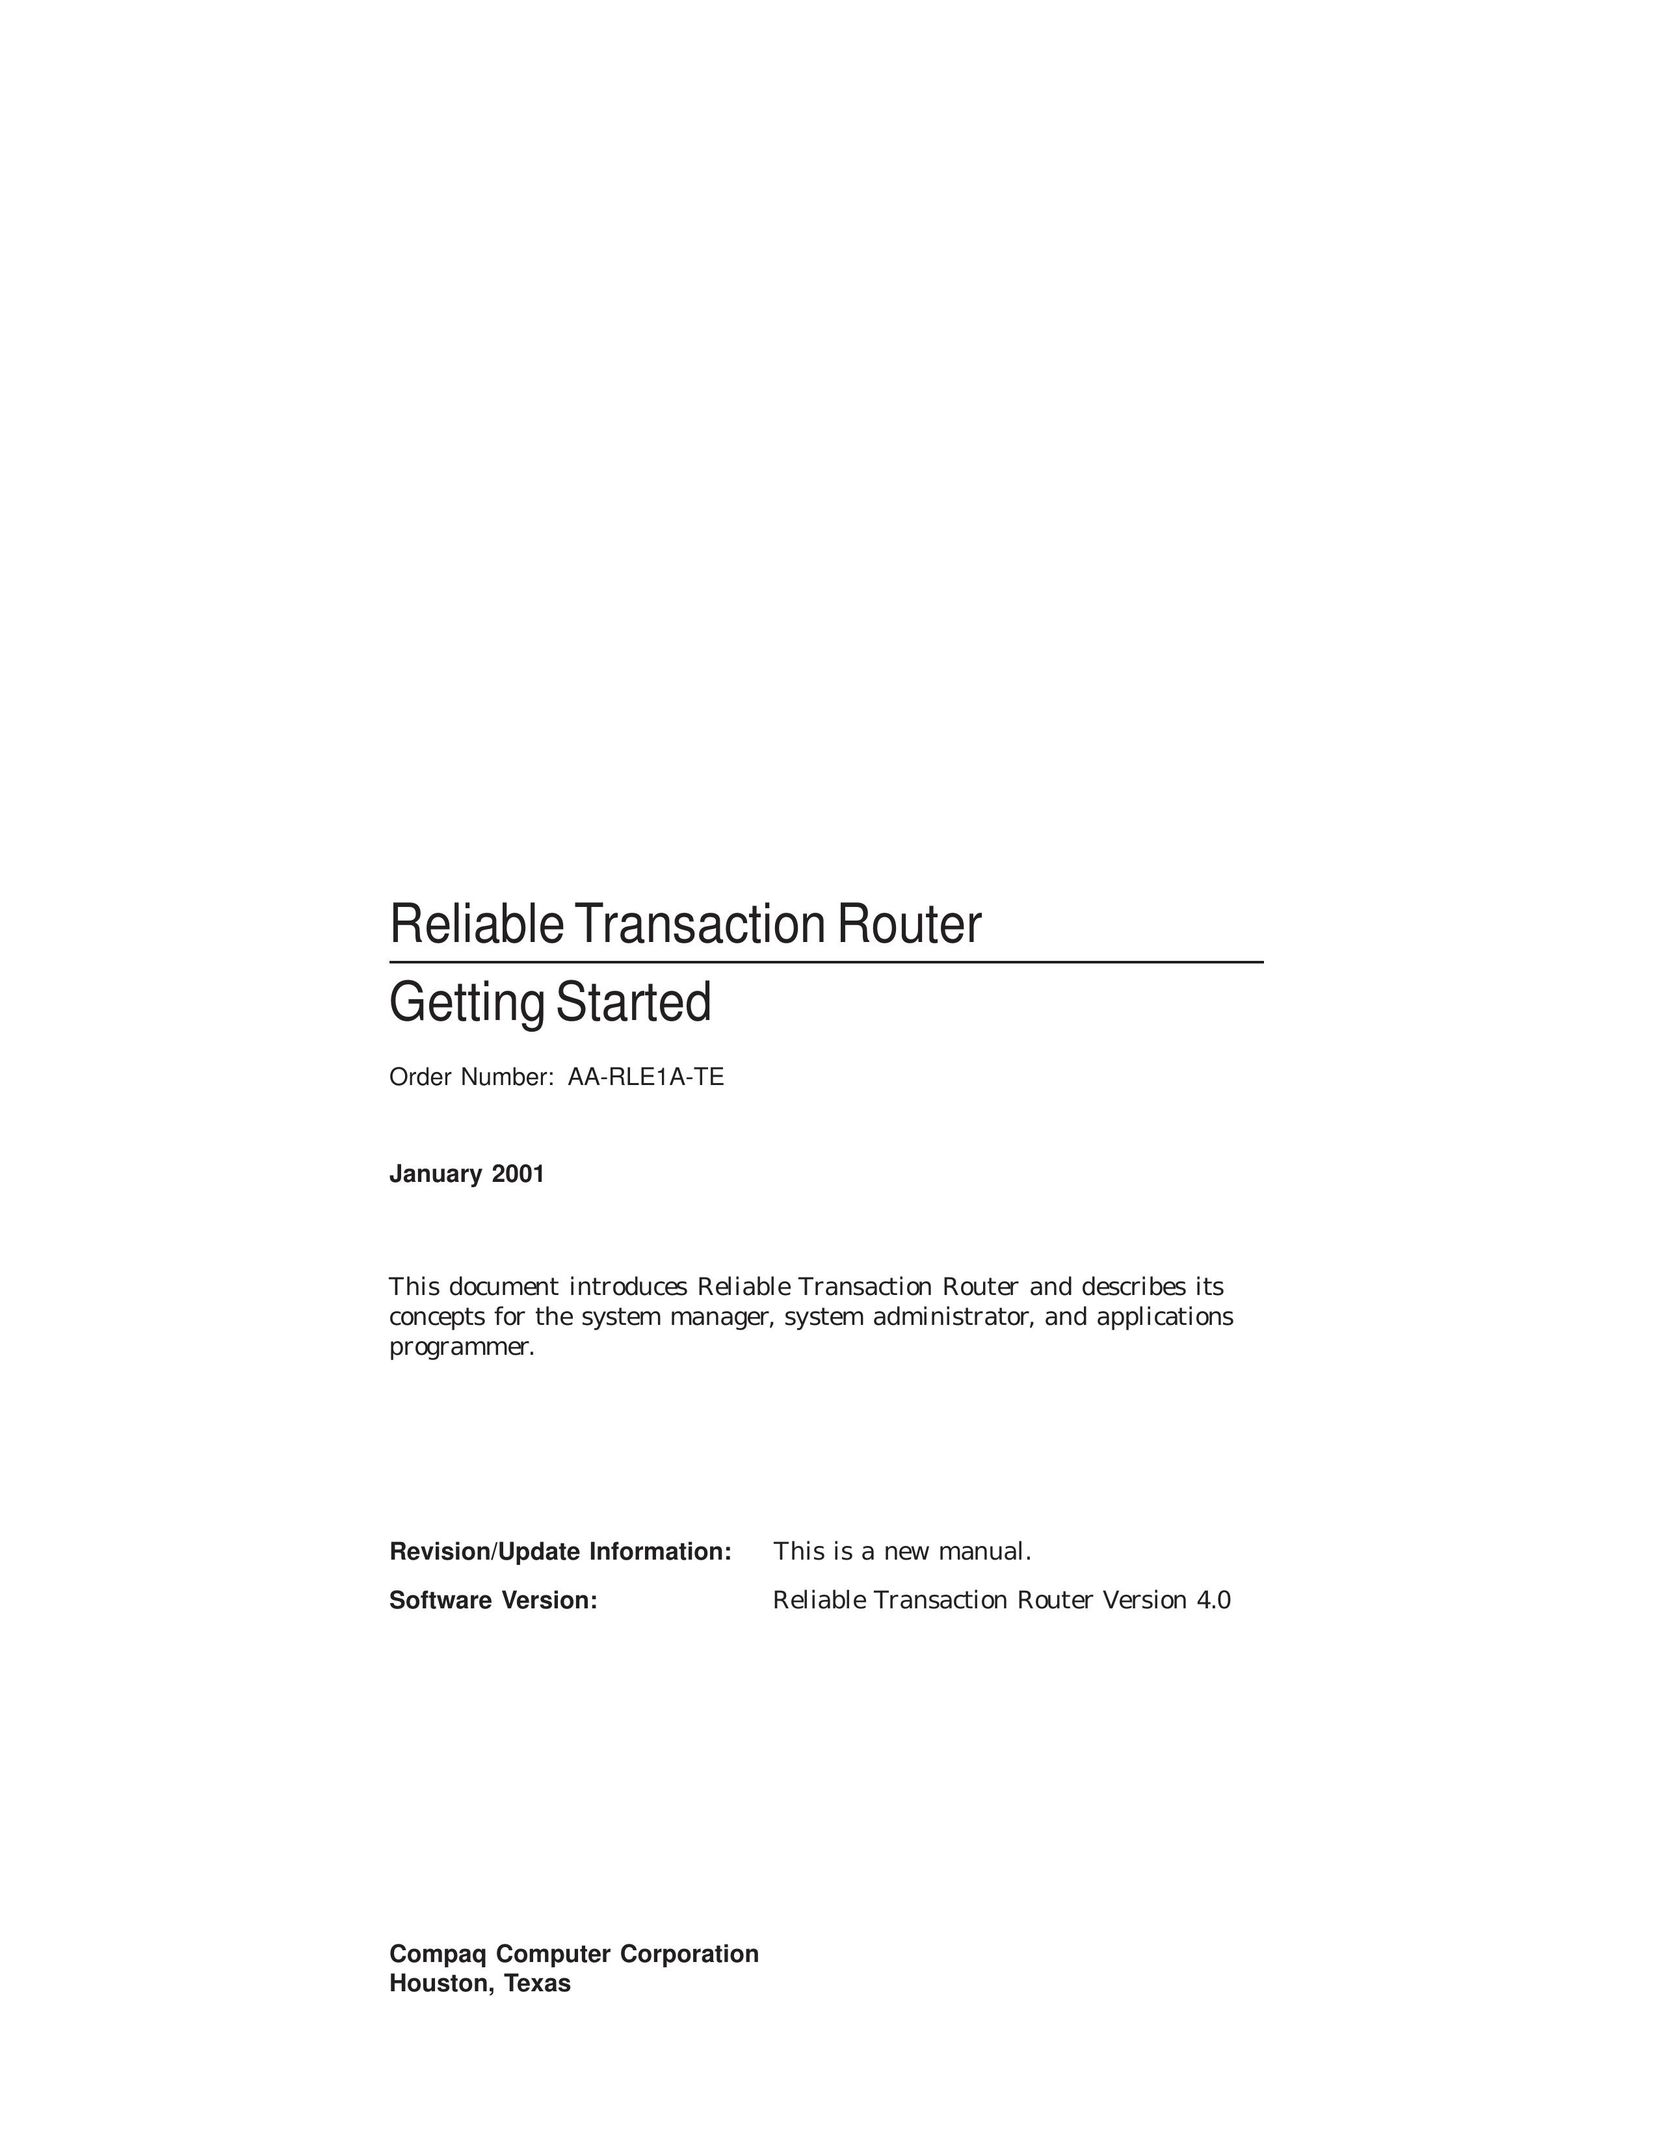 Compaq Reliable Transaction Router Network Router User Manual